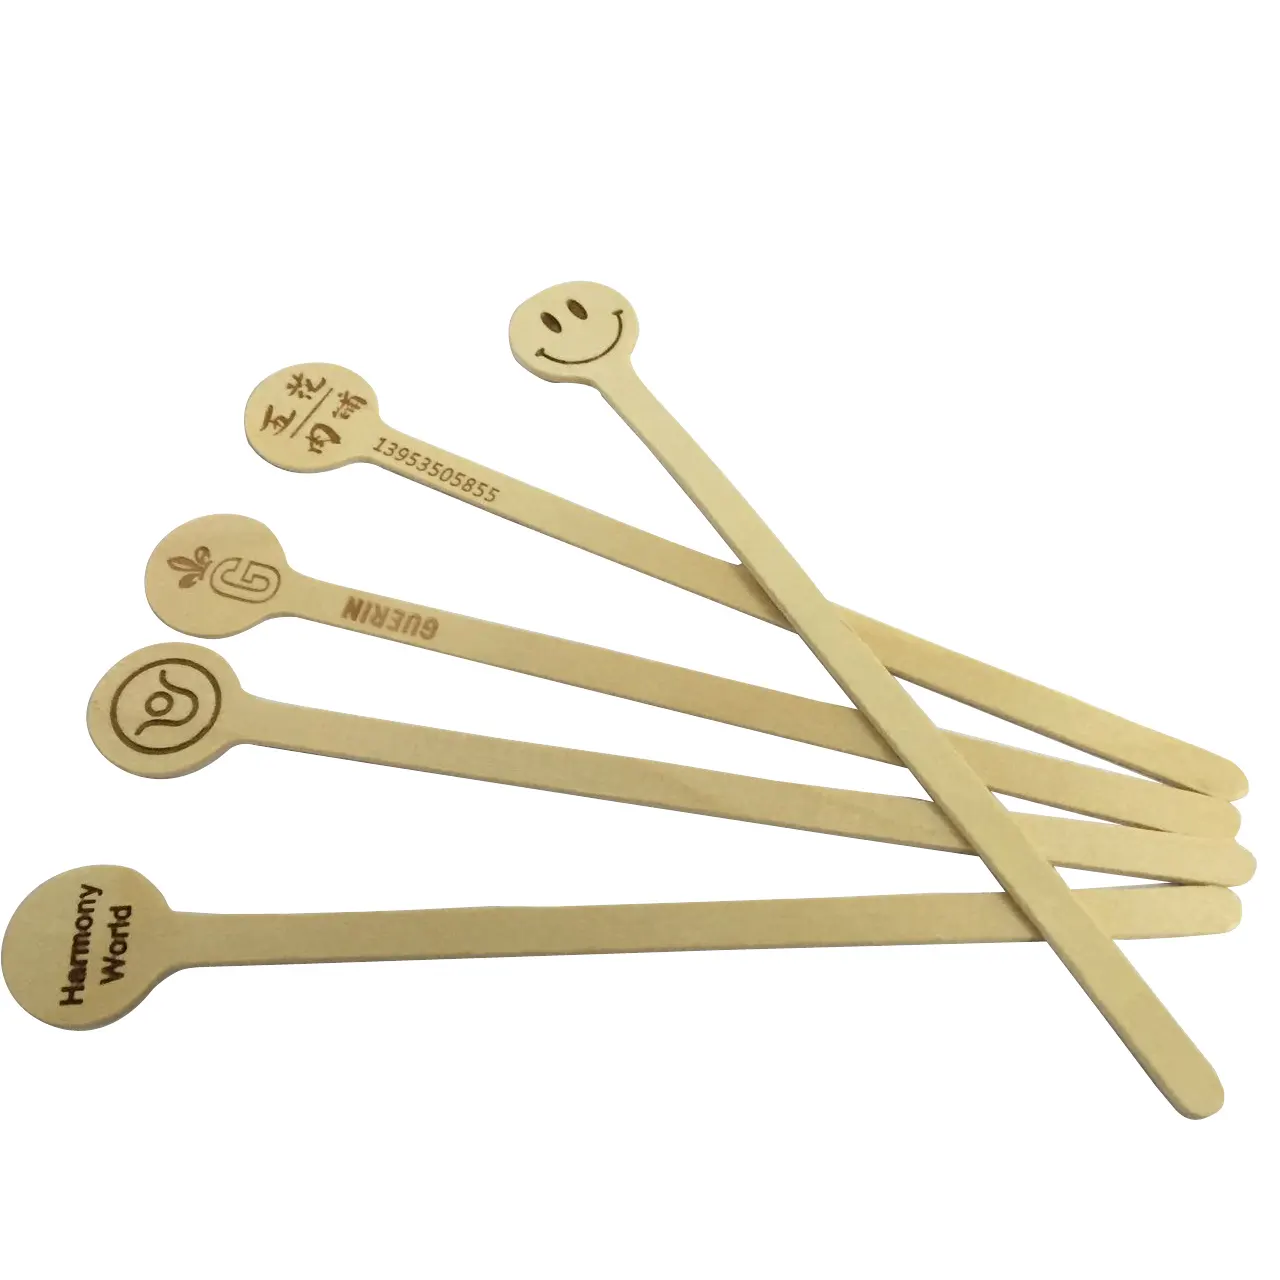 Printable Disc Top Bamboo Wooden Coffee Stirrers 7 Inch (180mm)